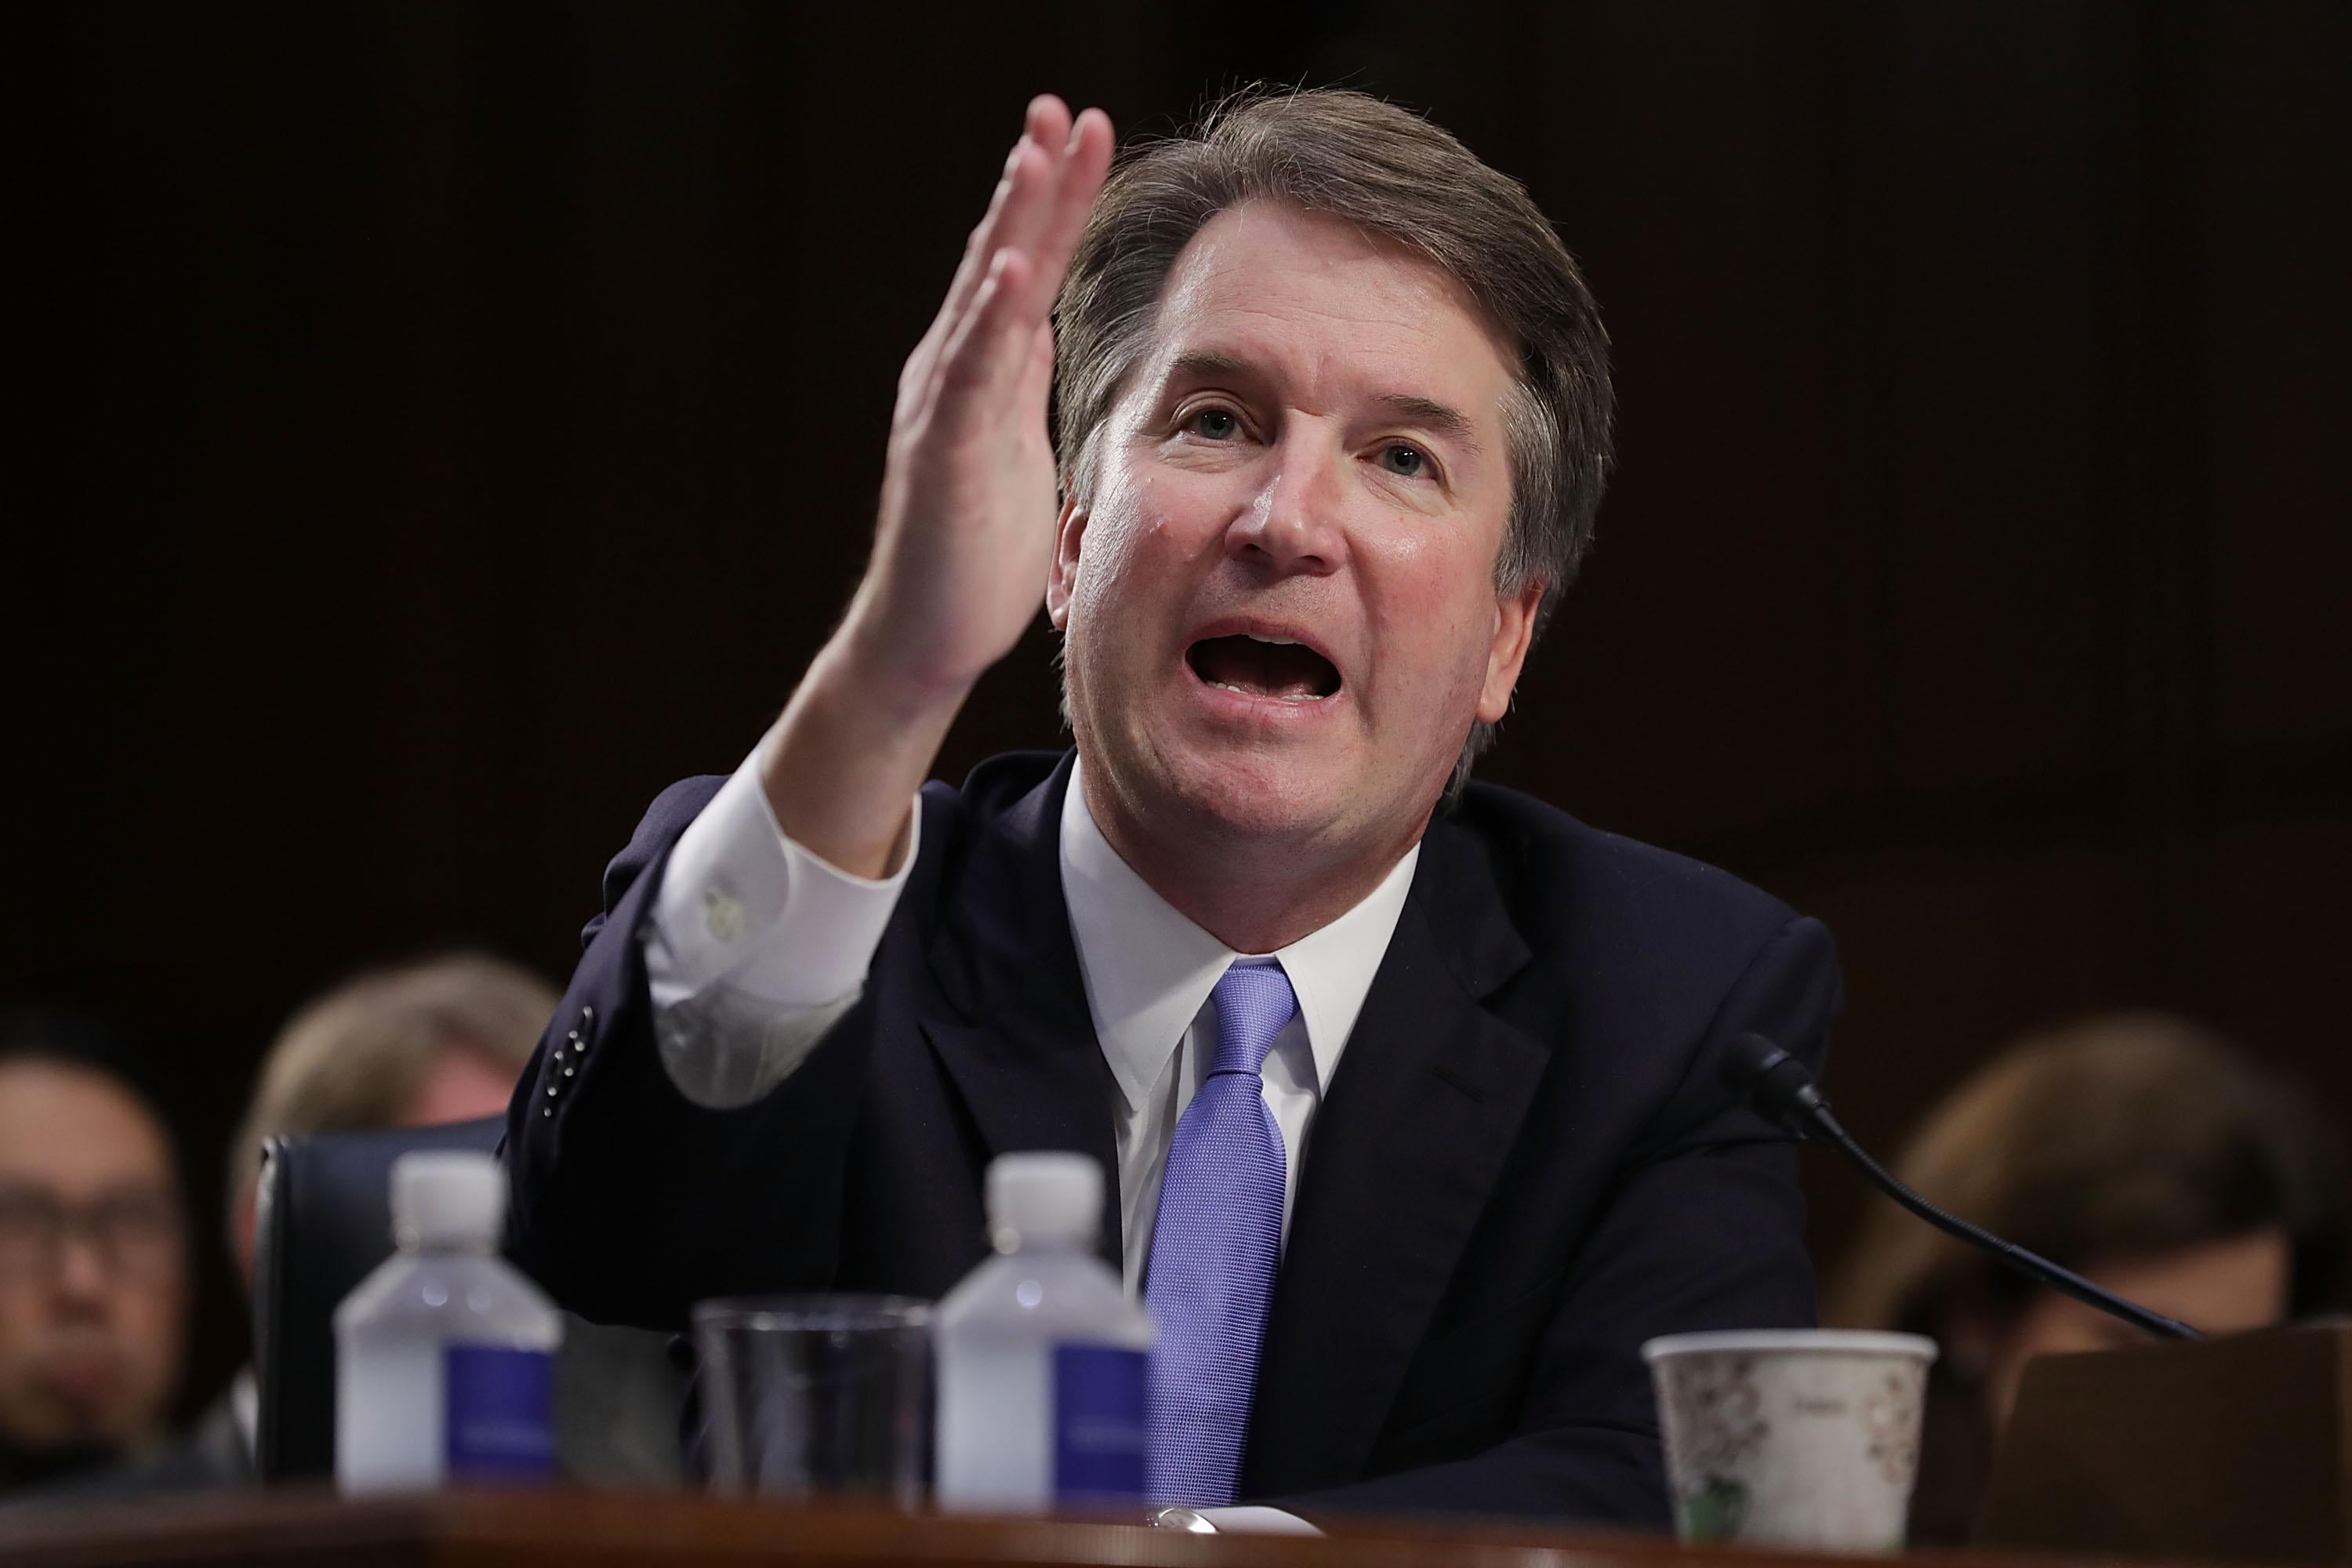 Brett Kavanaugh gesturing during his testimony for confirmation to the Supreme Court